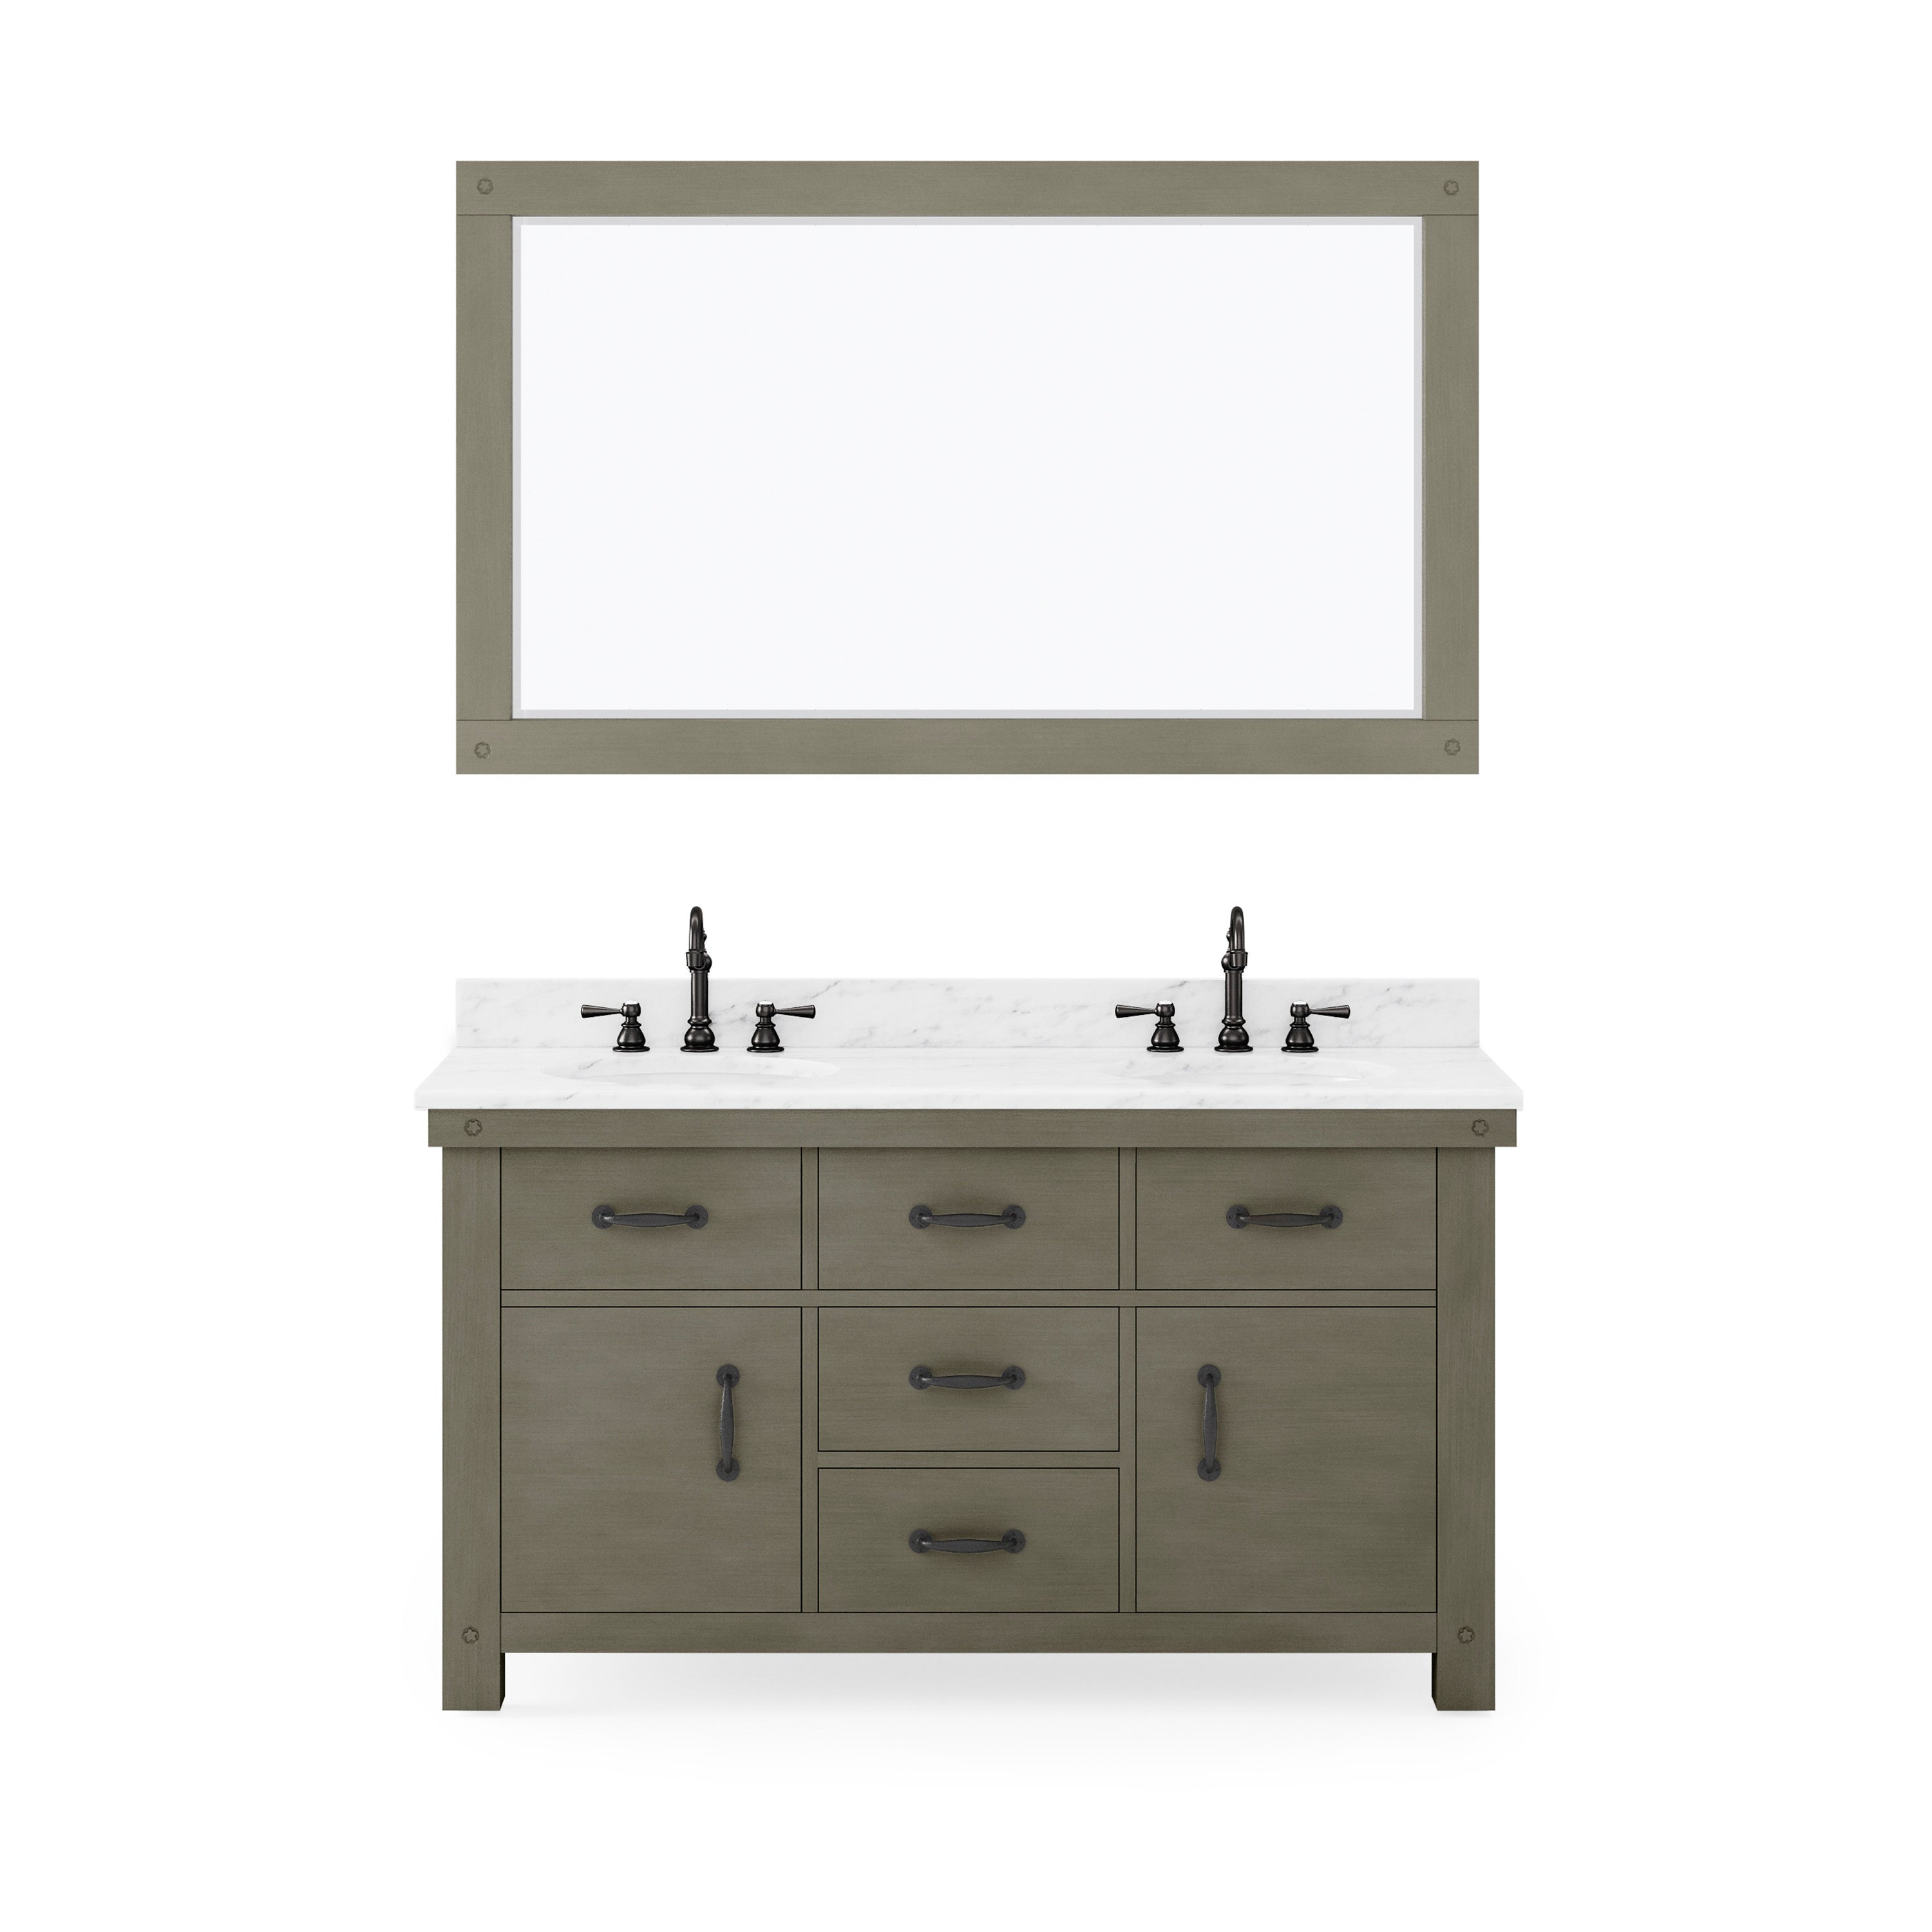 Water Creation | 60 Inch Grizzle Grey Double Sink Bathroom Vanity With Mirror With Carrara White Marble Counter Top From The ABERDEEN Collection | AB60CW03GG-A60000000